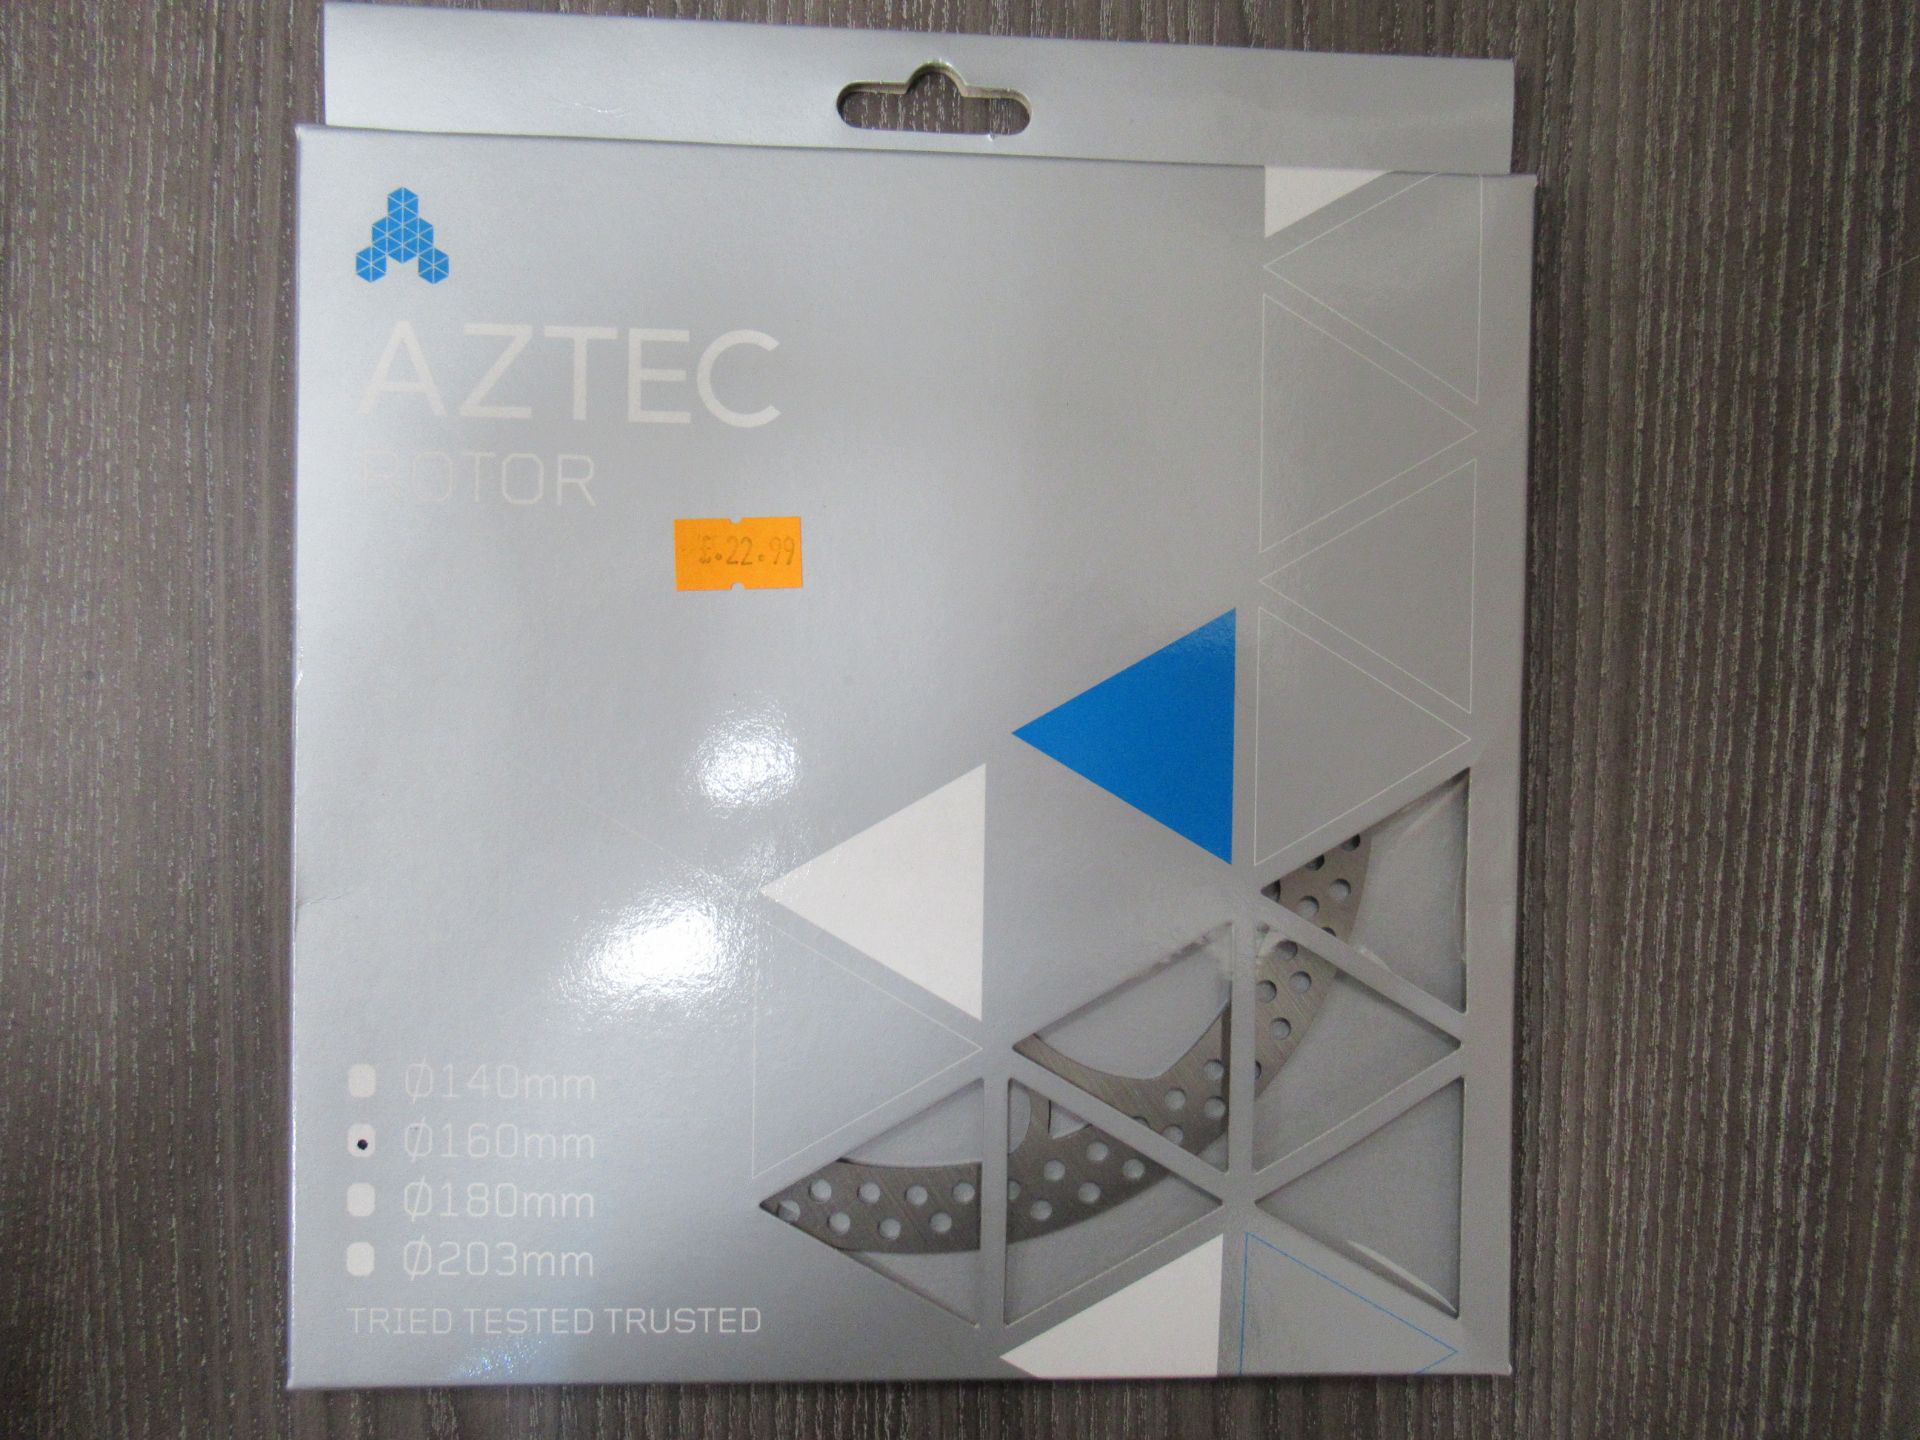 4 x Aztec Rotor's: 2 x 160mm (RRP£22.99); 1 x 180mm (RRP£25.99) and 1 x 203mm (RRP£27.99) - Image 4 of 9